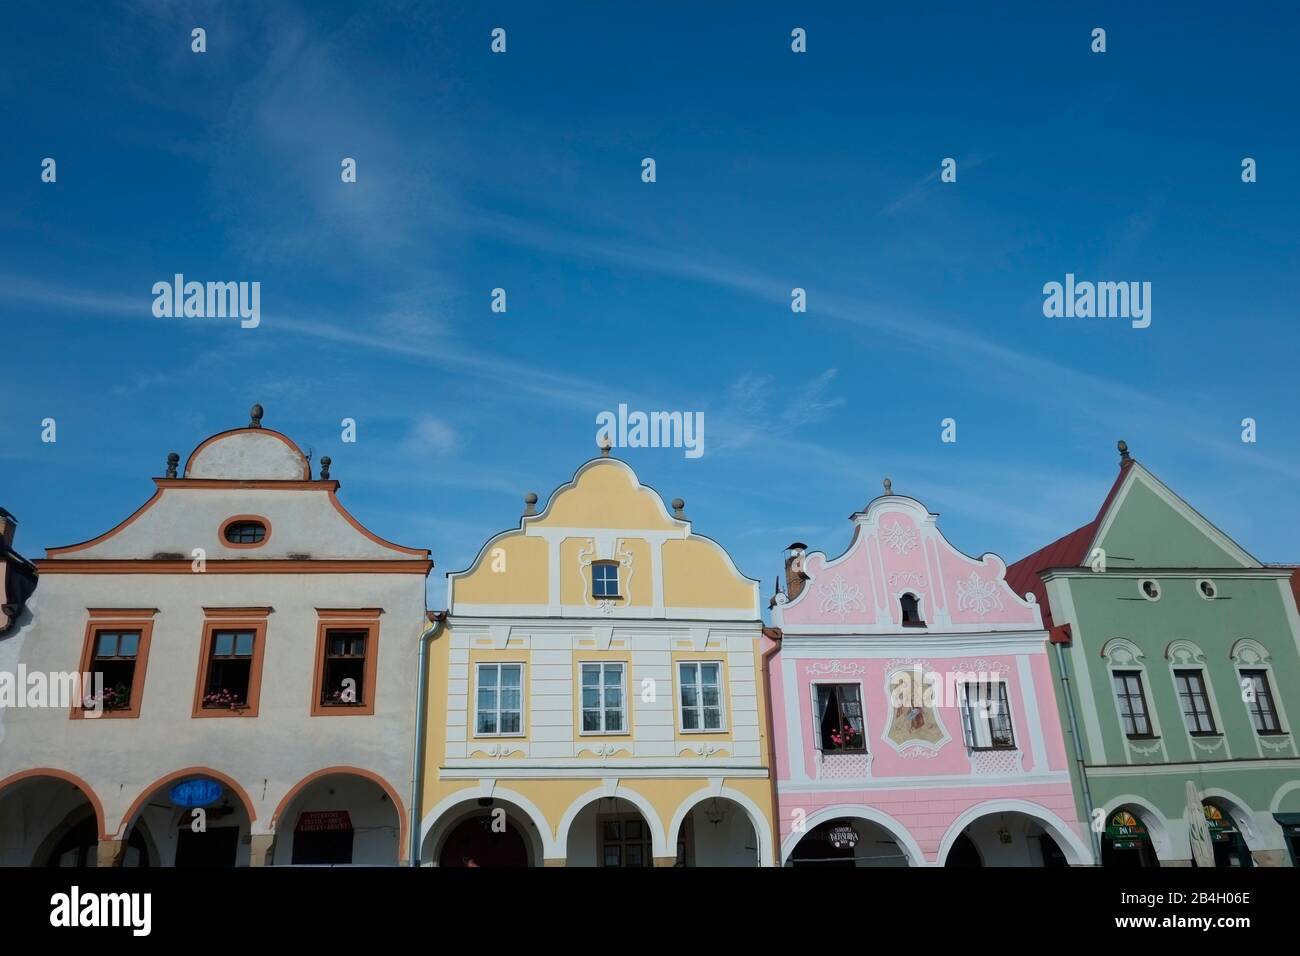 Czech Republic, Telc. The town was founded in the 13th century as a royal water fort on the crossroads of busy merchant routes between Bohemia, Moravia and Austria. Stock Photo